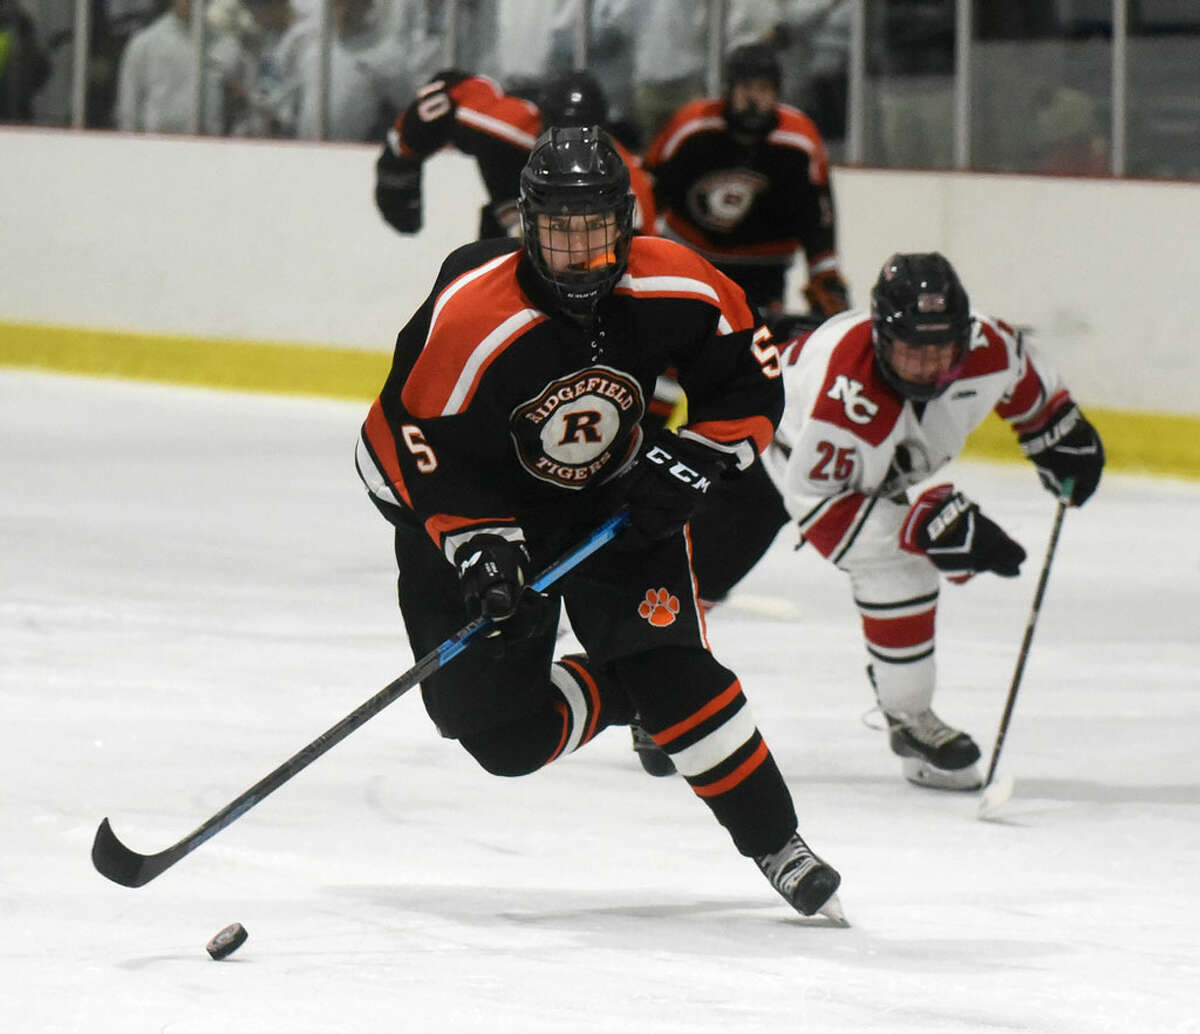 Ridgefield senior Henry Garlick (5) brings the puck through the neutral zone, as New Canaan’s Carter Spain (25) pursues during Tuesday’s boys ice hockey game at the Darien Ice House.